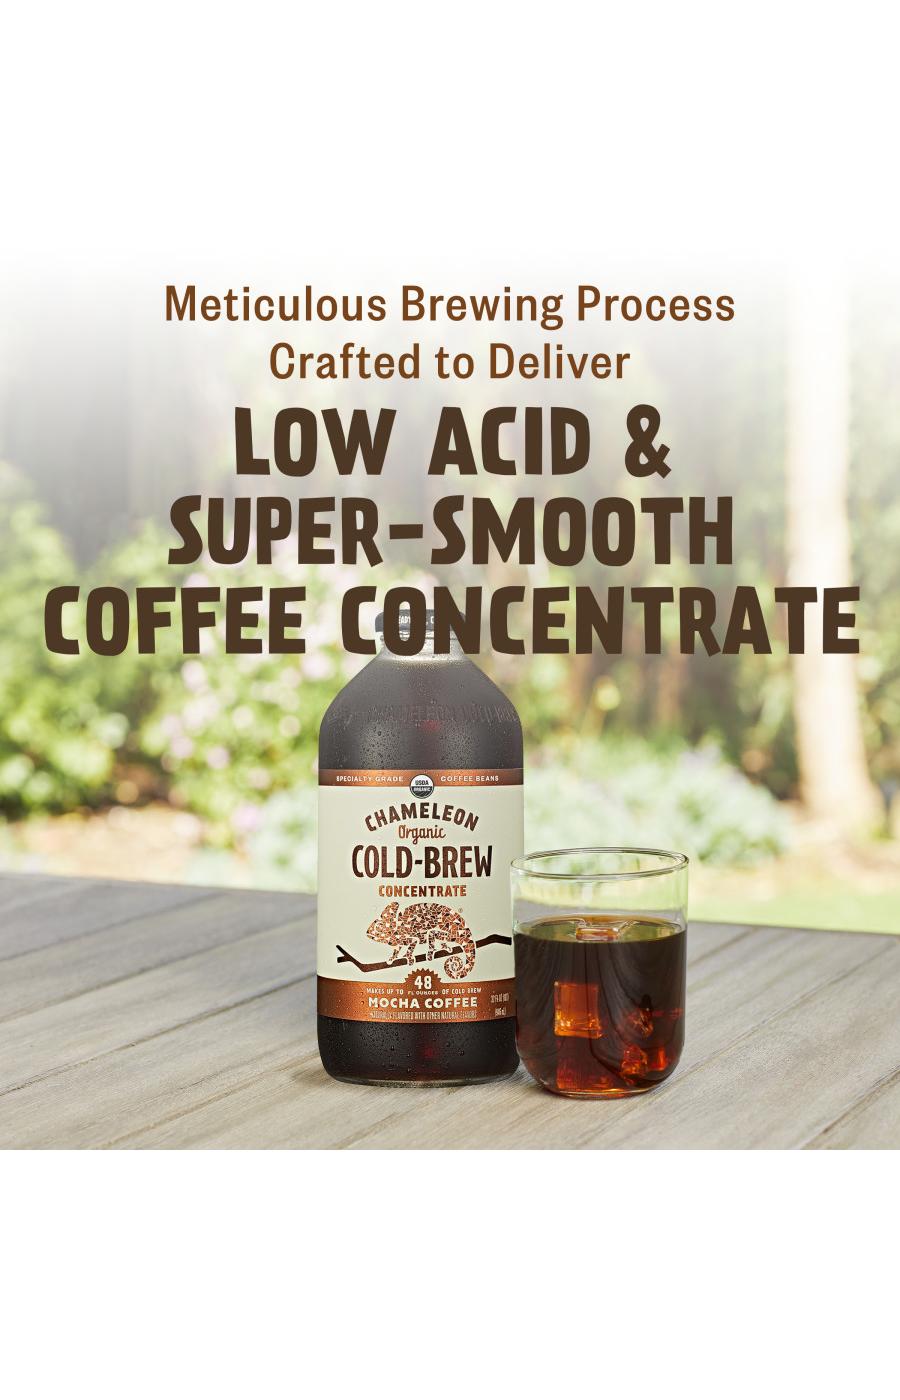 Chameleon Organic Mocha Flavored Cold Brew Coffee Concentrate; image 7 of 8